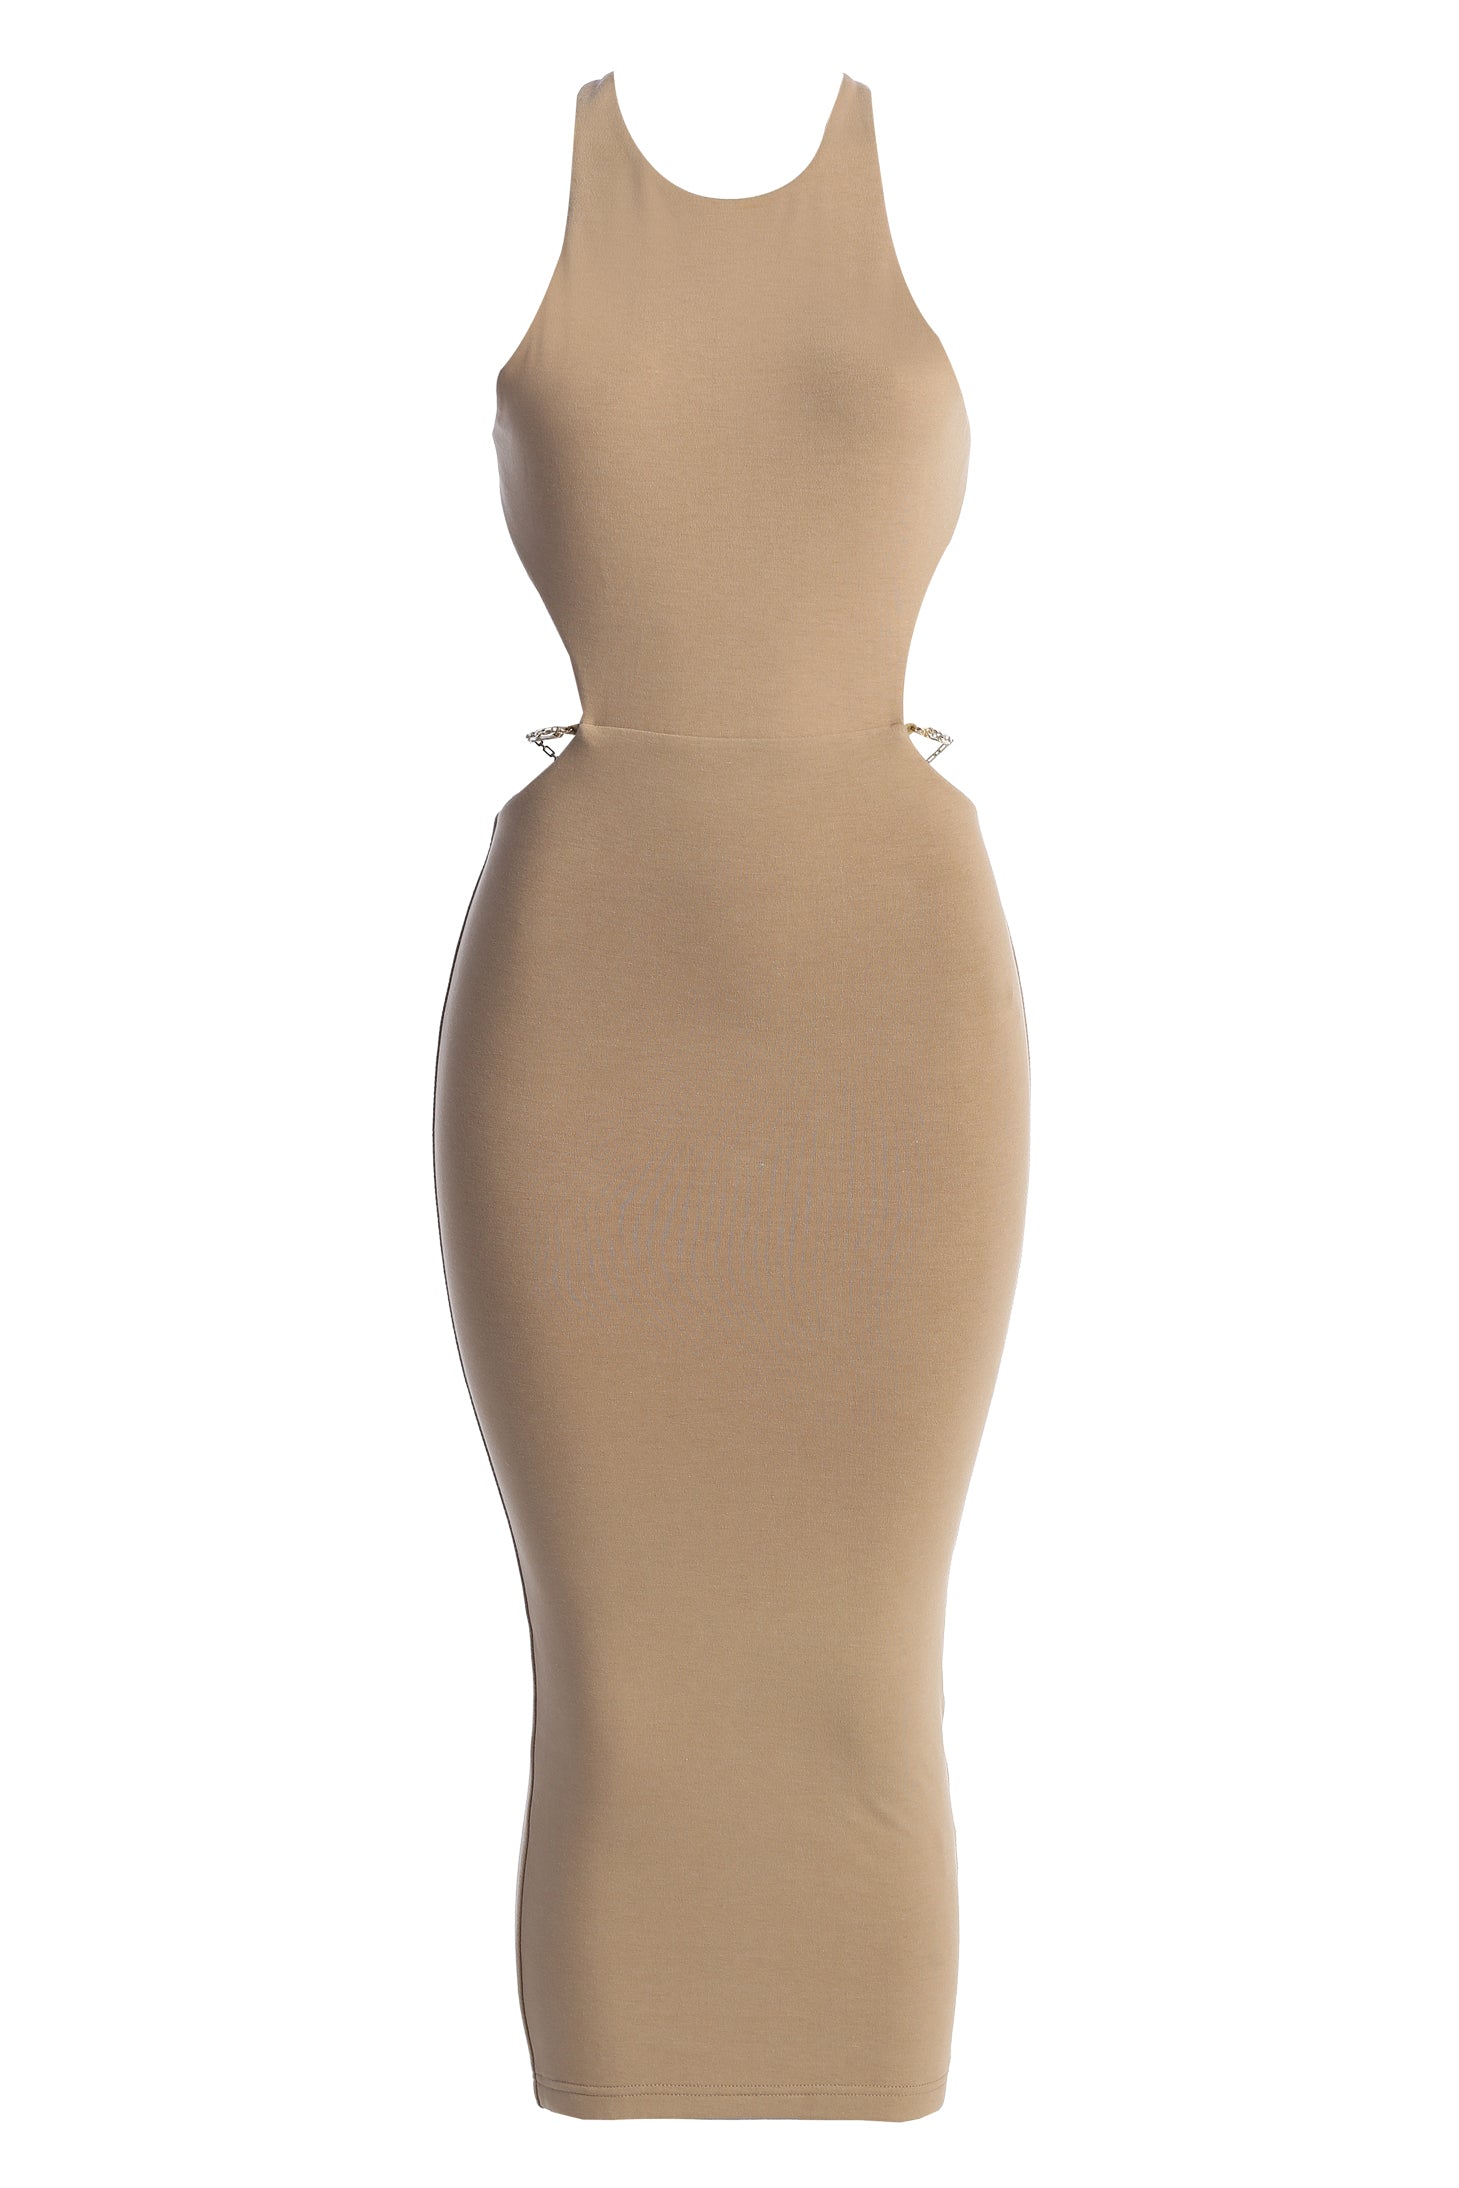 MINA Natural Nude Beige Slip Dress Extender With Lace Trim on Bottom -   Canada